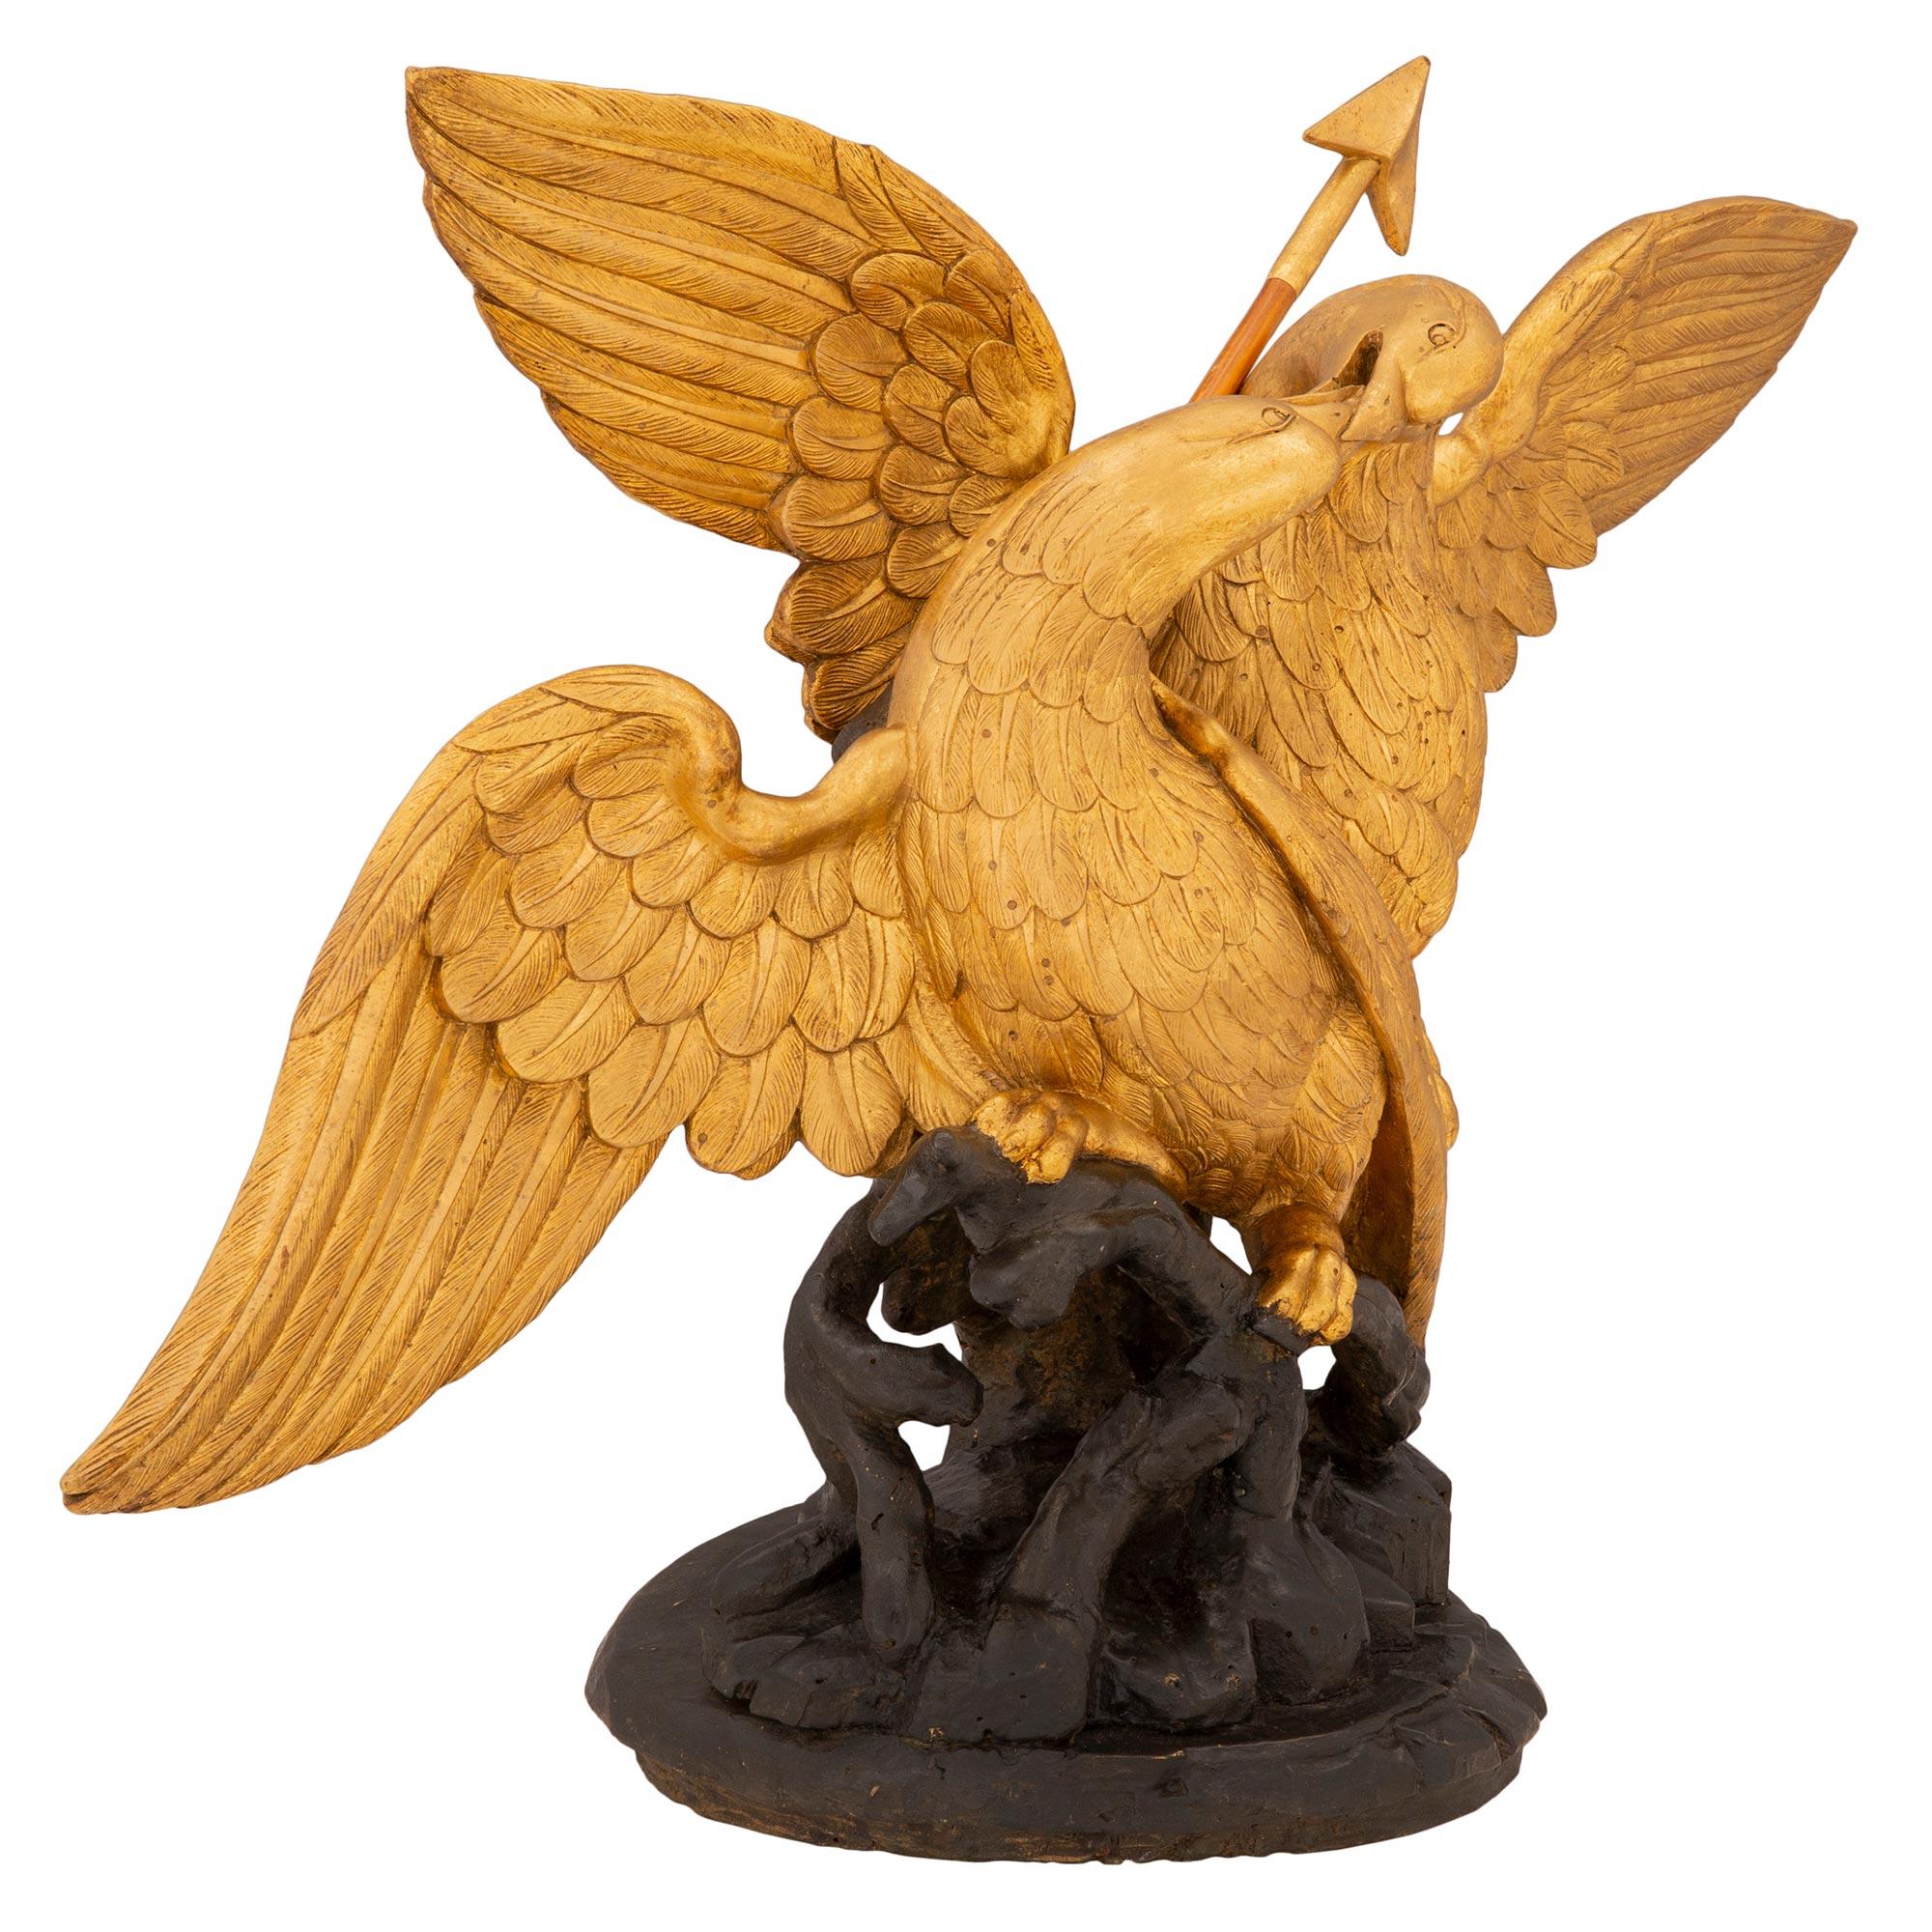 A striking Italian 18th century giltwood and polychrome statue of two eagles. The statue is raised by a most decorative polychrome ground and branch like designed base. Above are two striking and richly carved eagles engaged in a battle over their